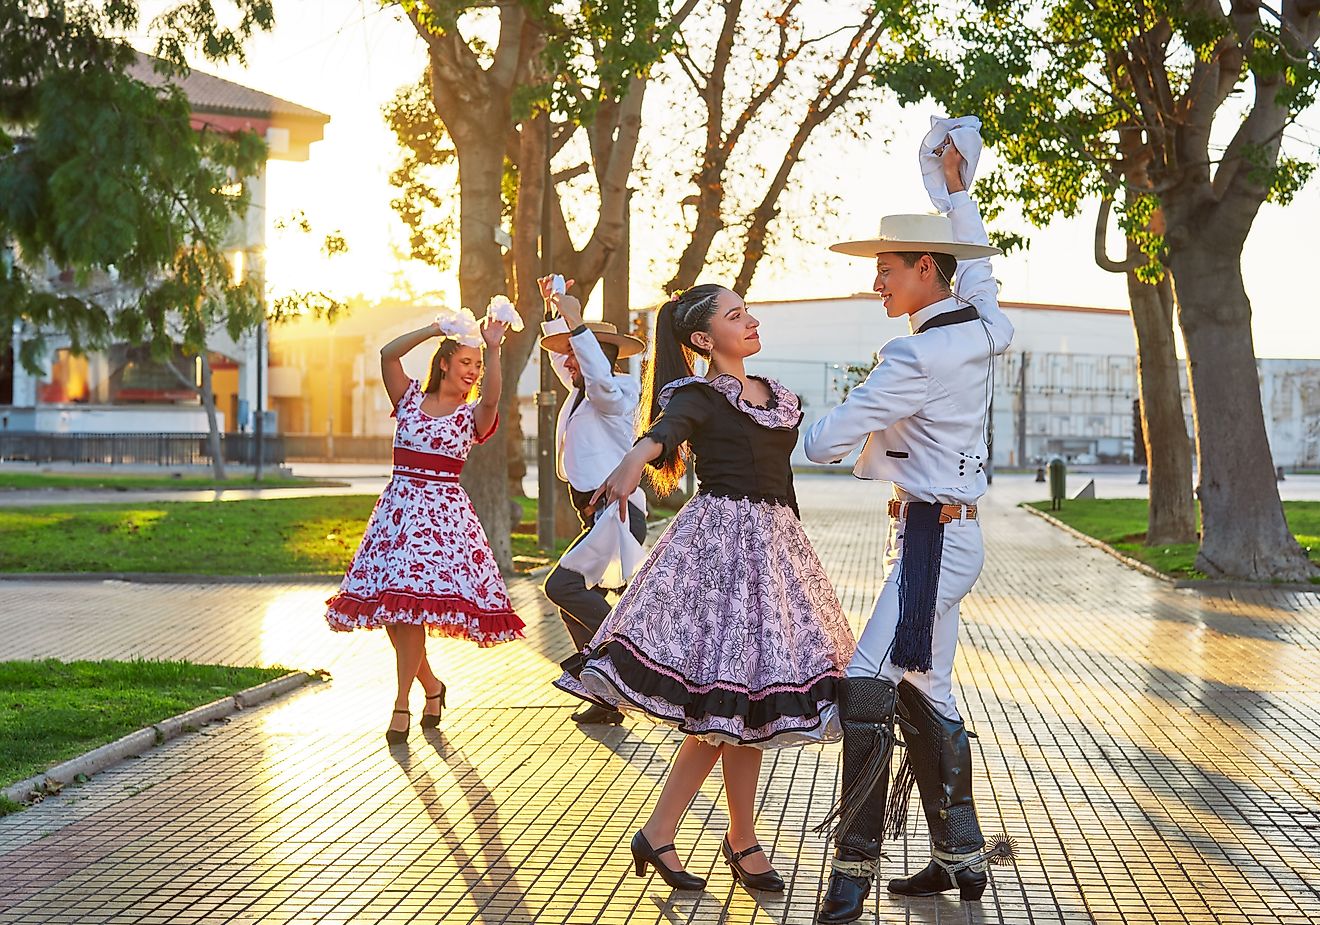 At sunset in La Serena, Chile, two Latin American couples dressed as huasos dance cueca in the town square.